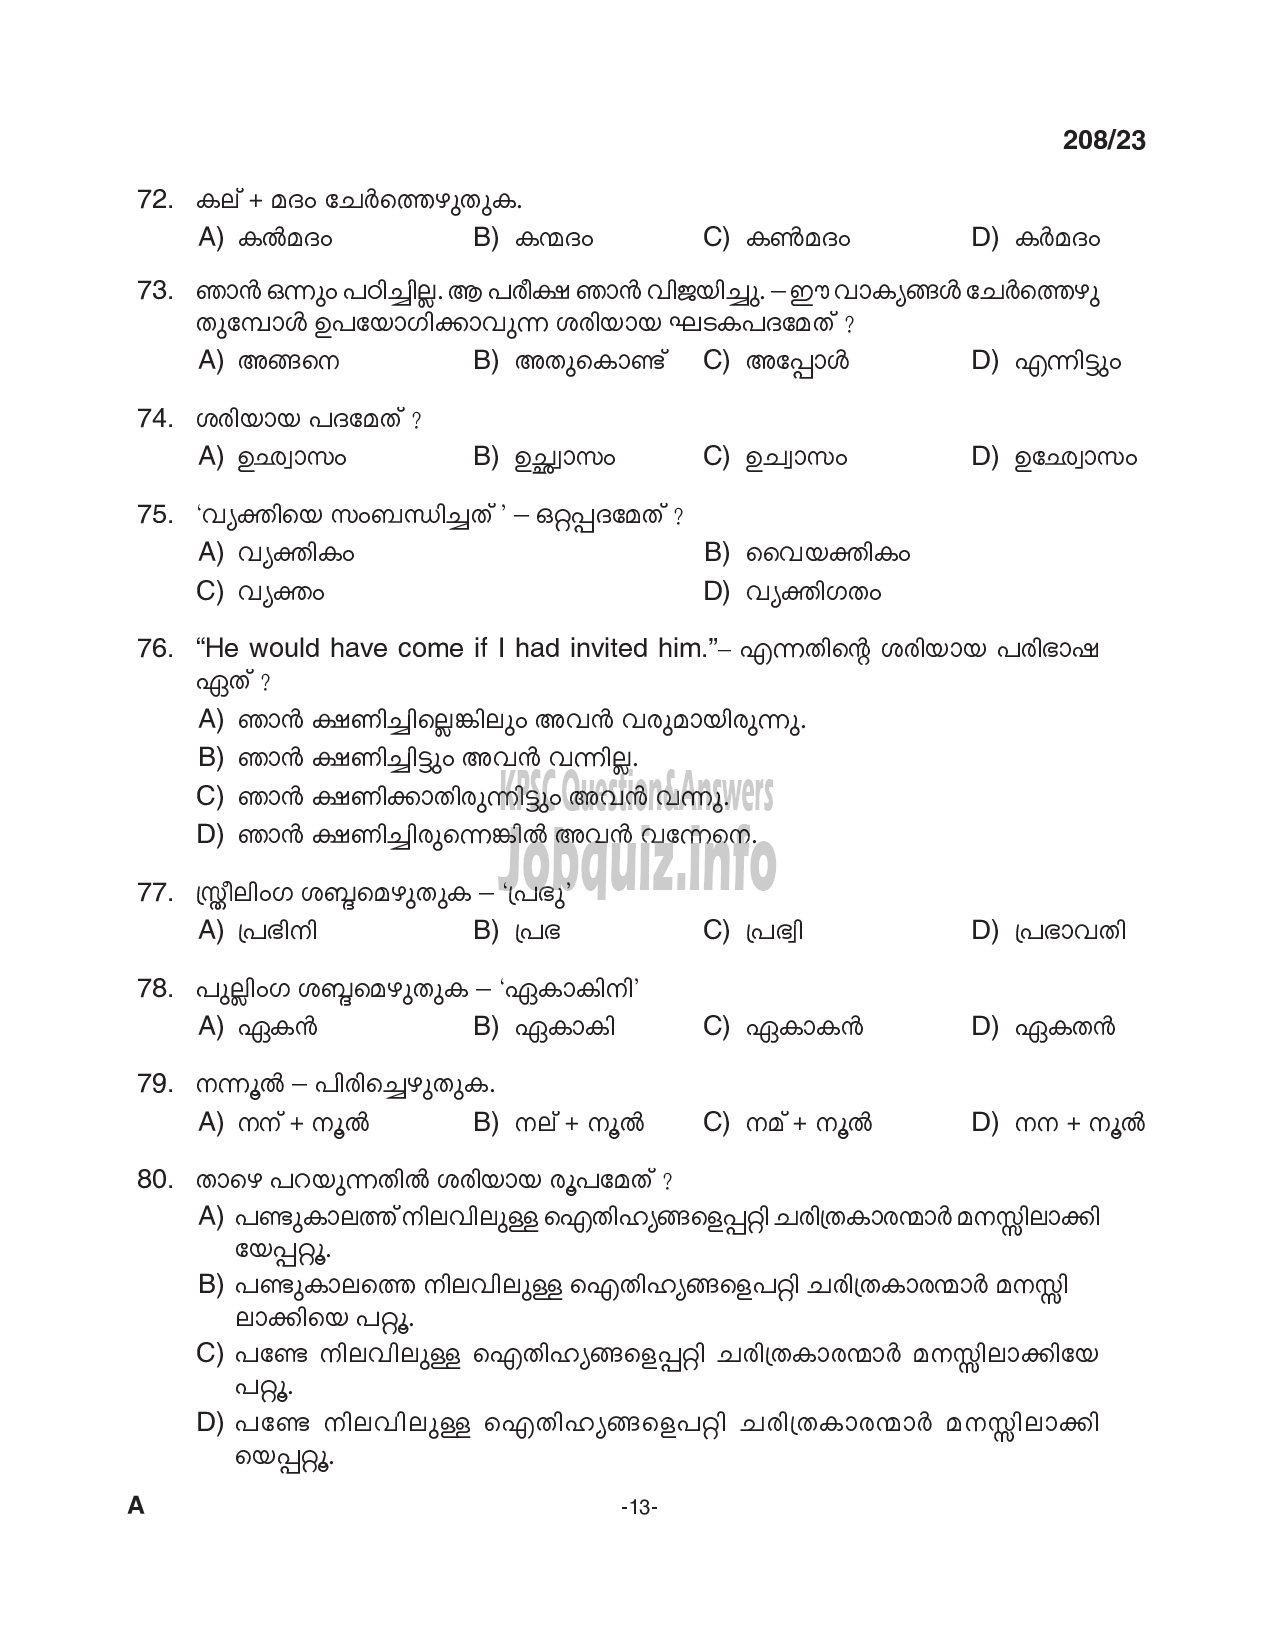 Kerala PSC Question Paper - Clerk/ LD Clerk (Tamil and Malayalam knowing) (Preliminary Examination)-13